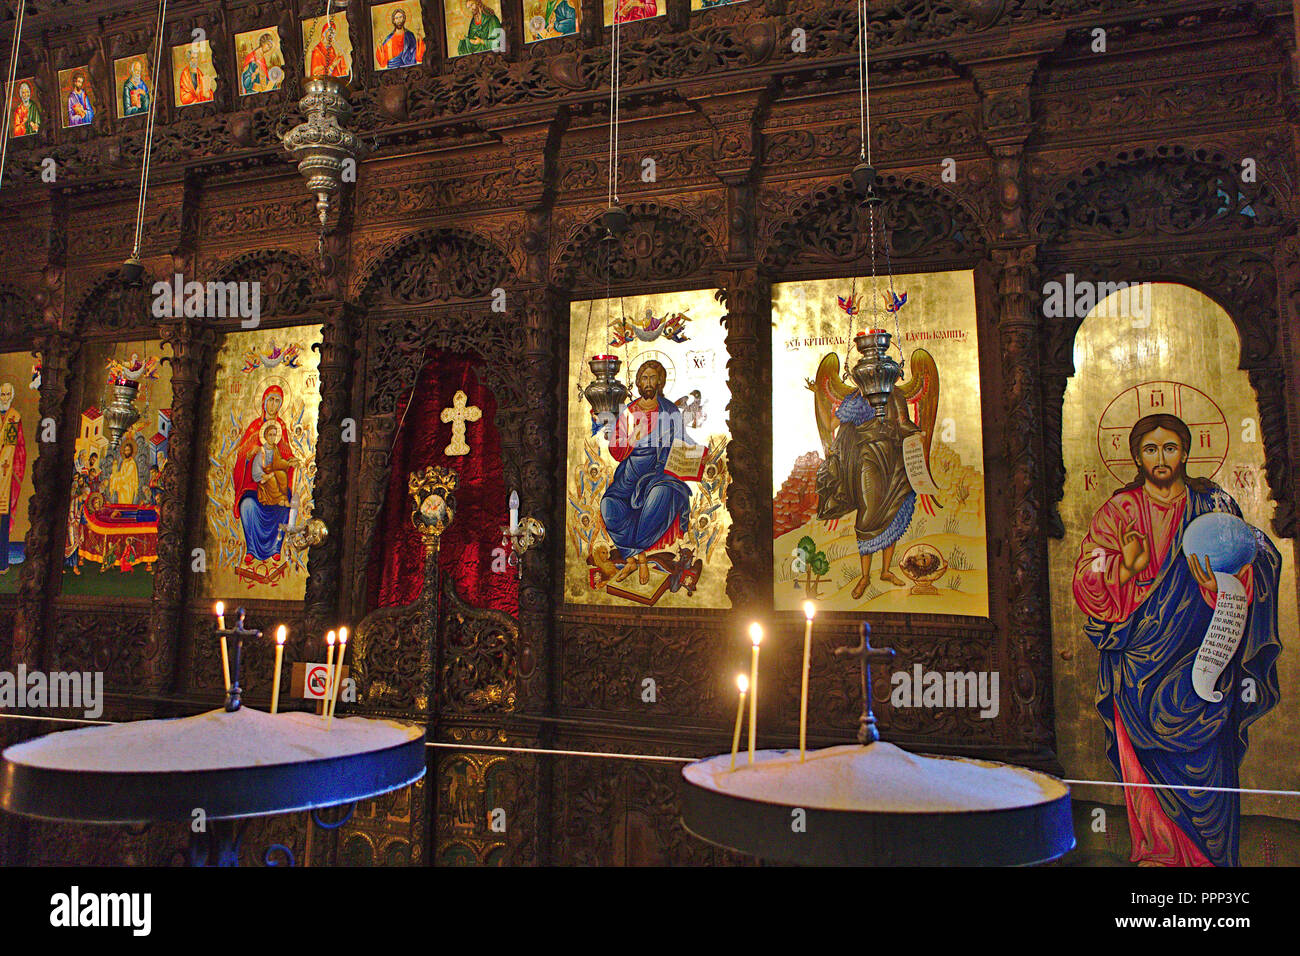 rich view of paintings and wooden engraving inside the church Stock Photo